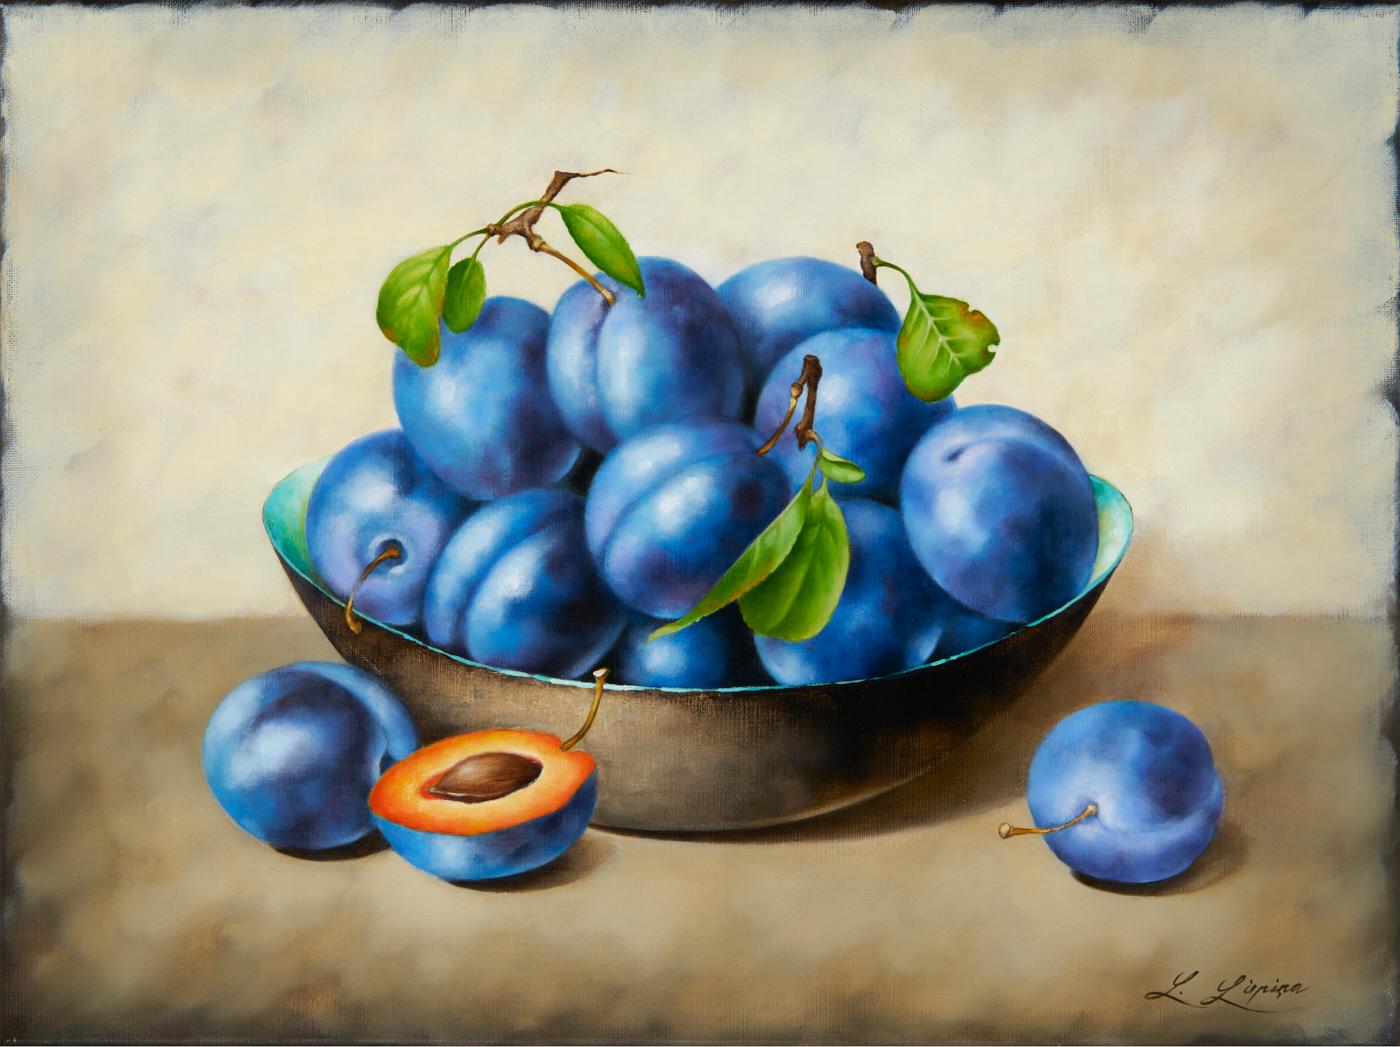 Liene Liepina  Still-Life Painting - Plums, 2020. Oil on canvas, 30 x 40 cm 